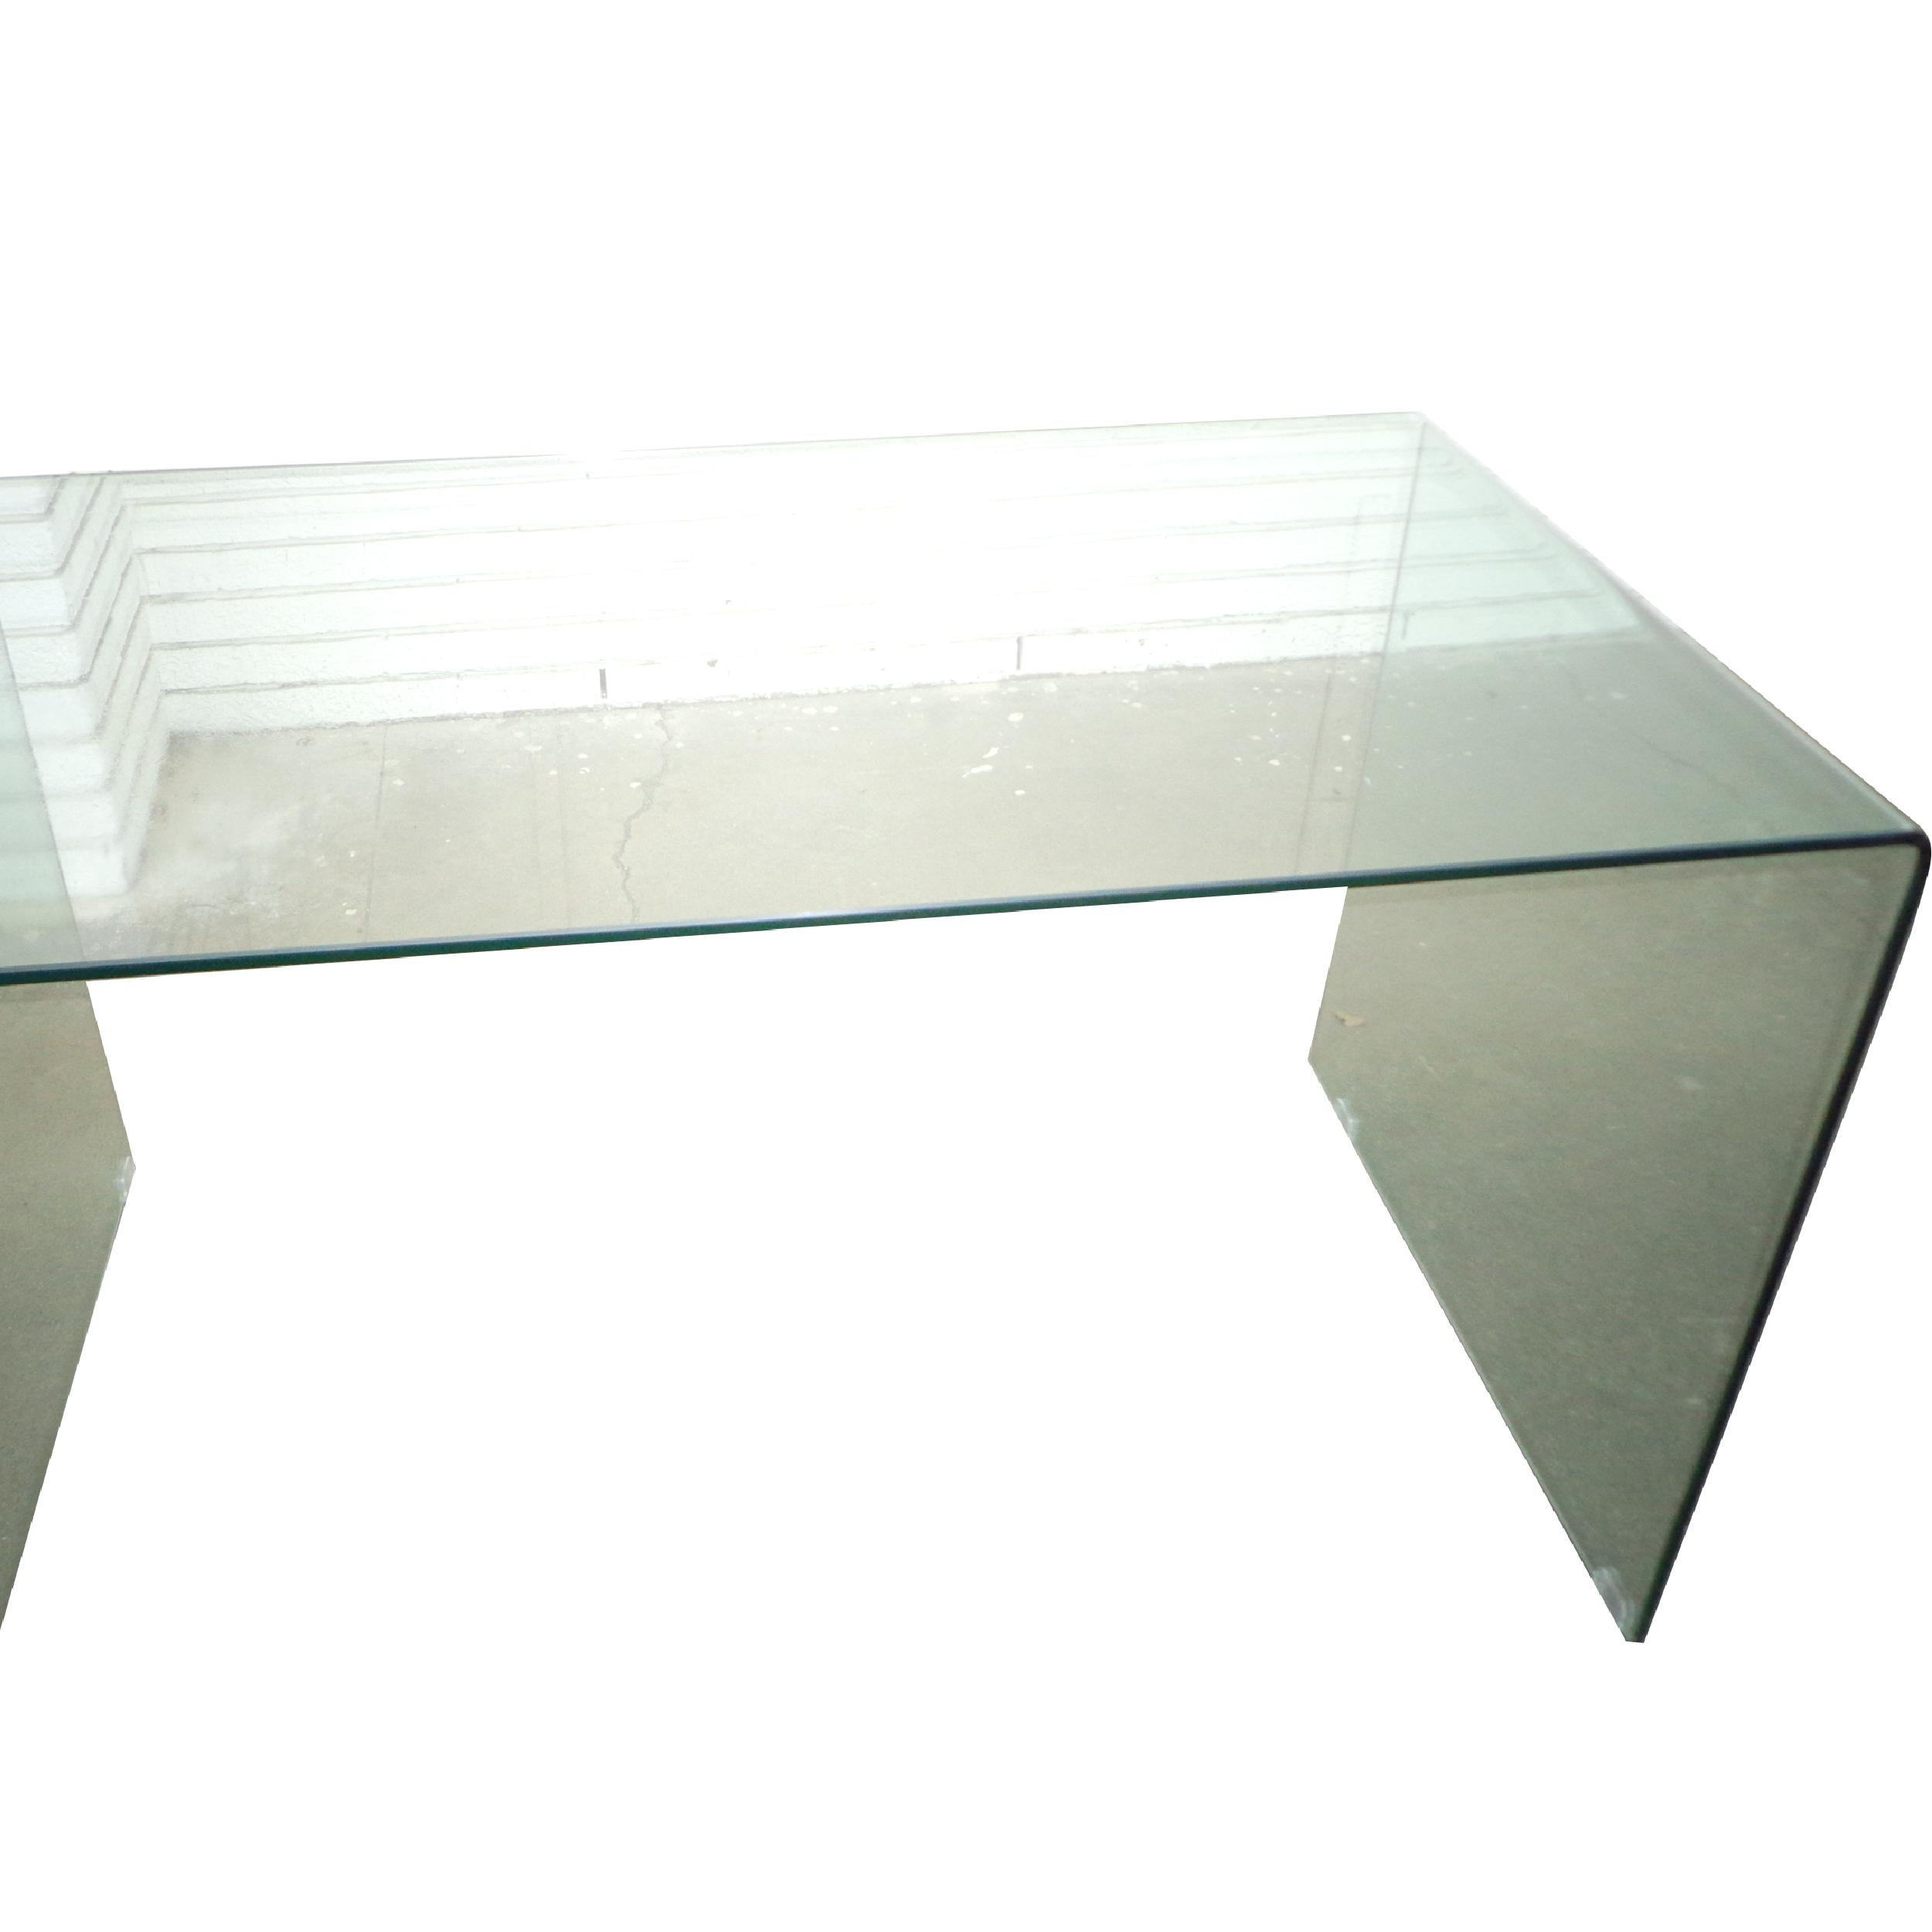 20th Century Modern Waterfall Glass Desk or Console Table For Sale